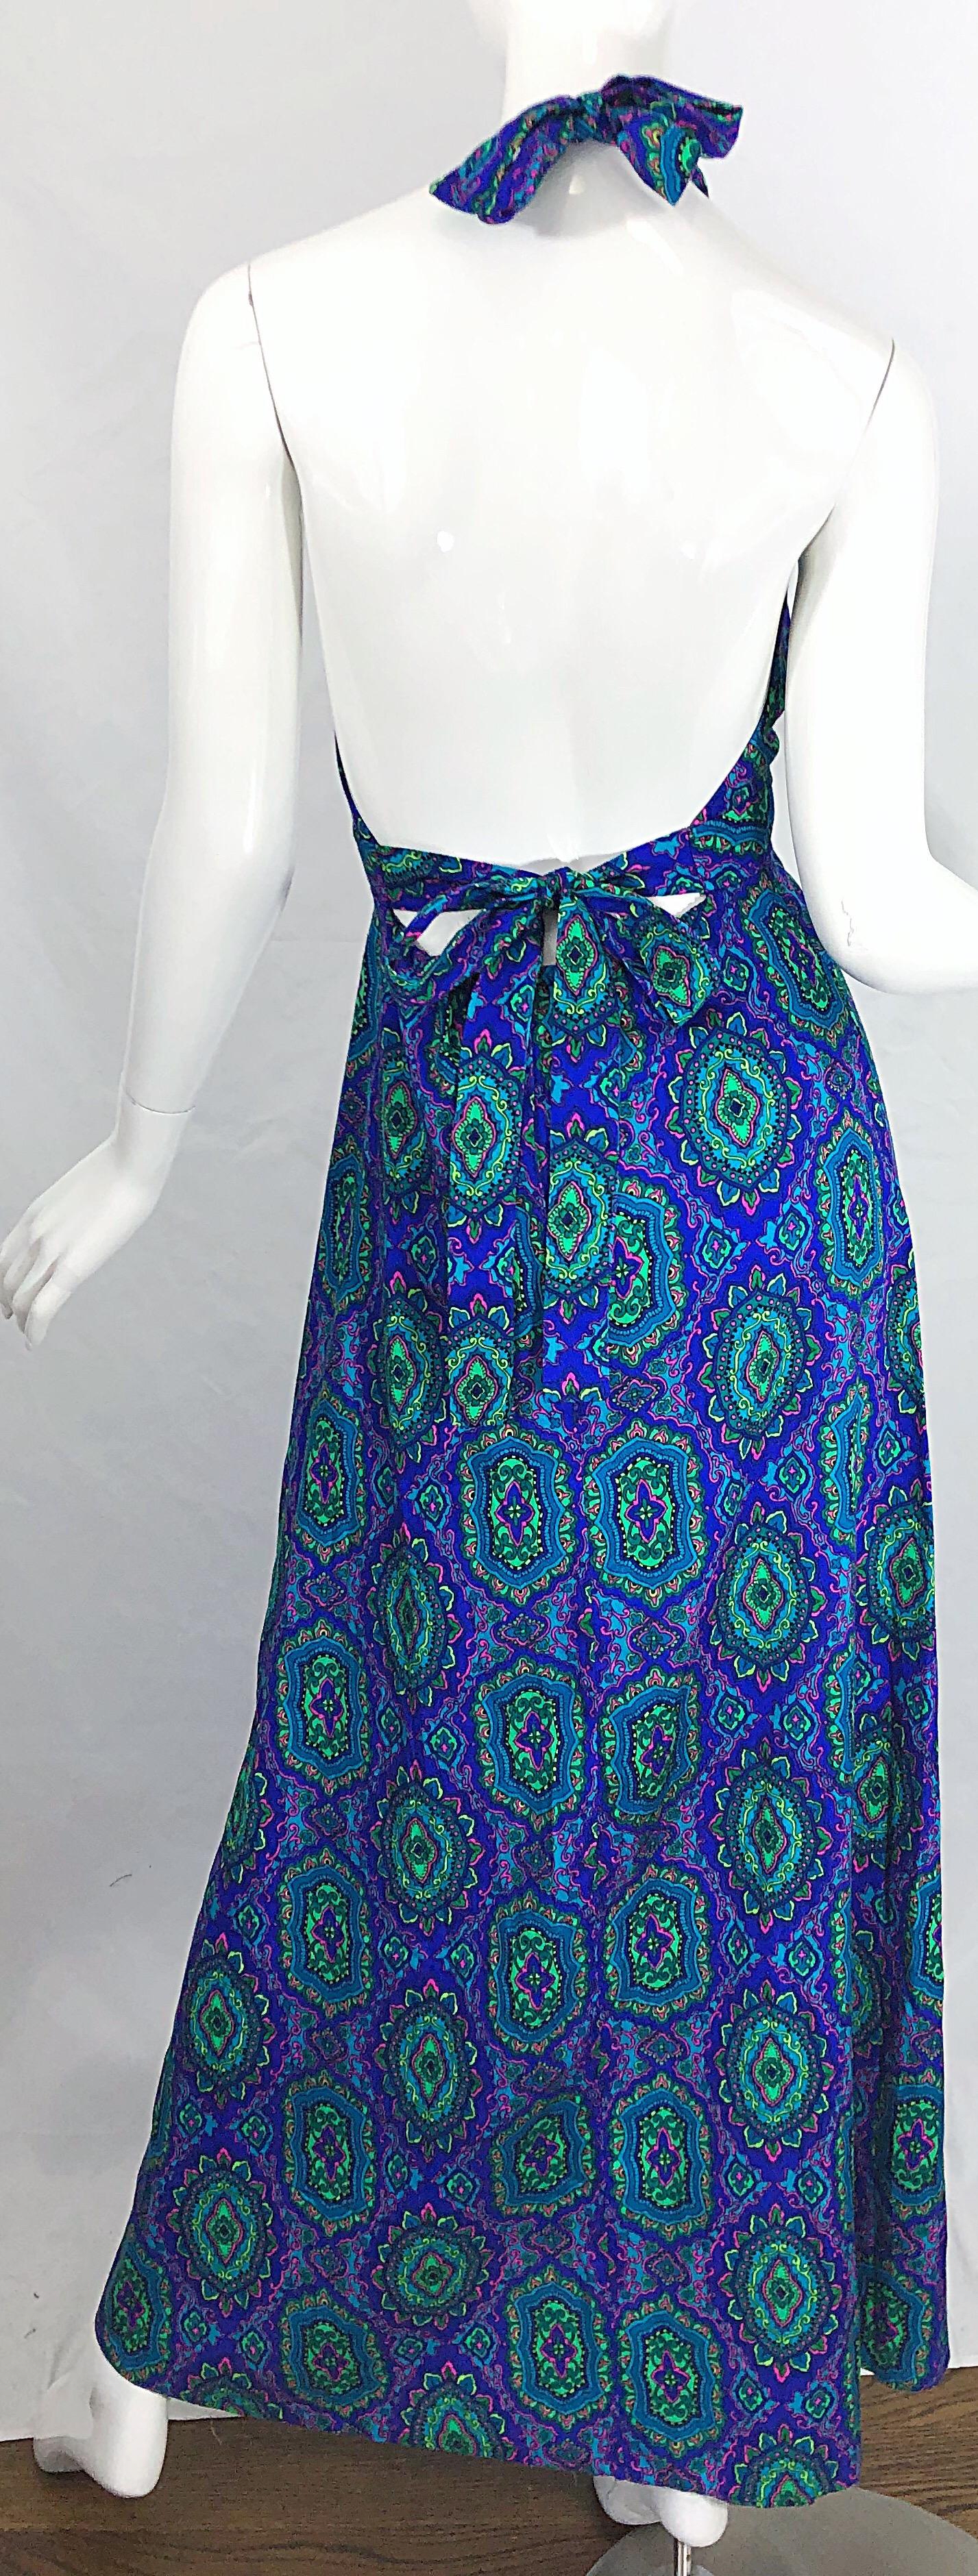 1970s Paisley Purple Blue Green Boho Vintage Cotton Rayon 70s Maxi Halter Dress In Excellent Condition For Sale In San Diego, CA